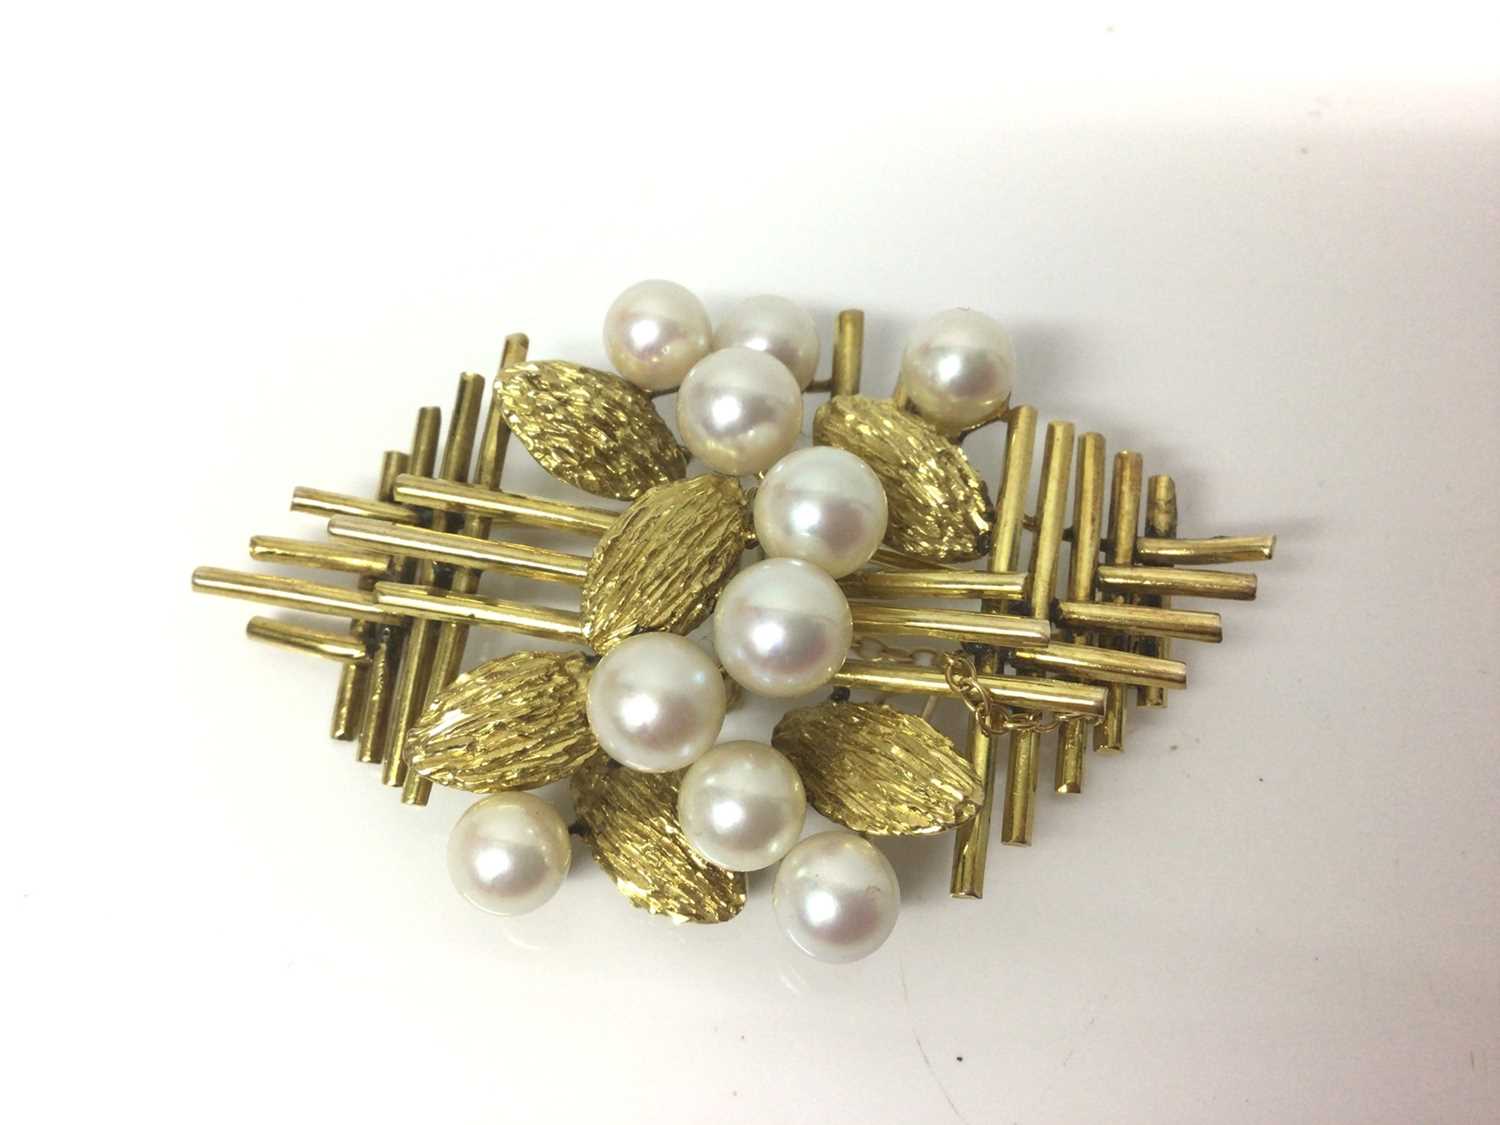 Lot 84 - 1960s 14ct gold and cultured pearl floral spray brooch with ten 6-6.8mm cultured pearls in a 14ct yellow gold grid design amongst gold leaves. 60mm.